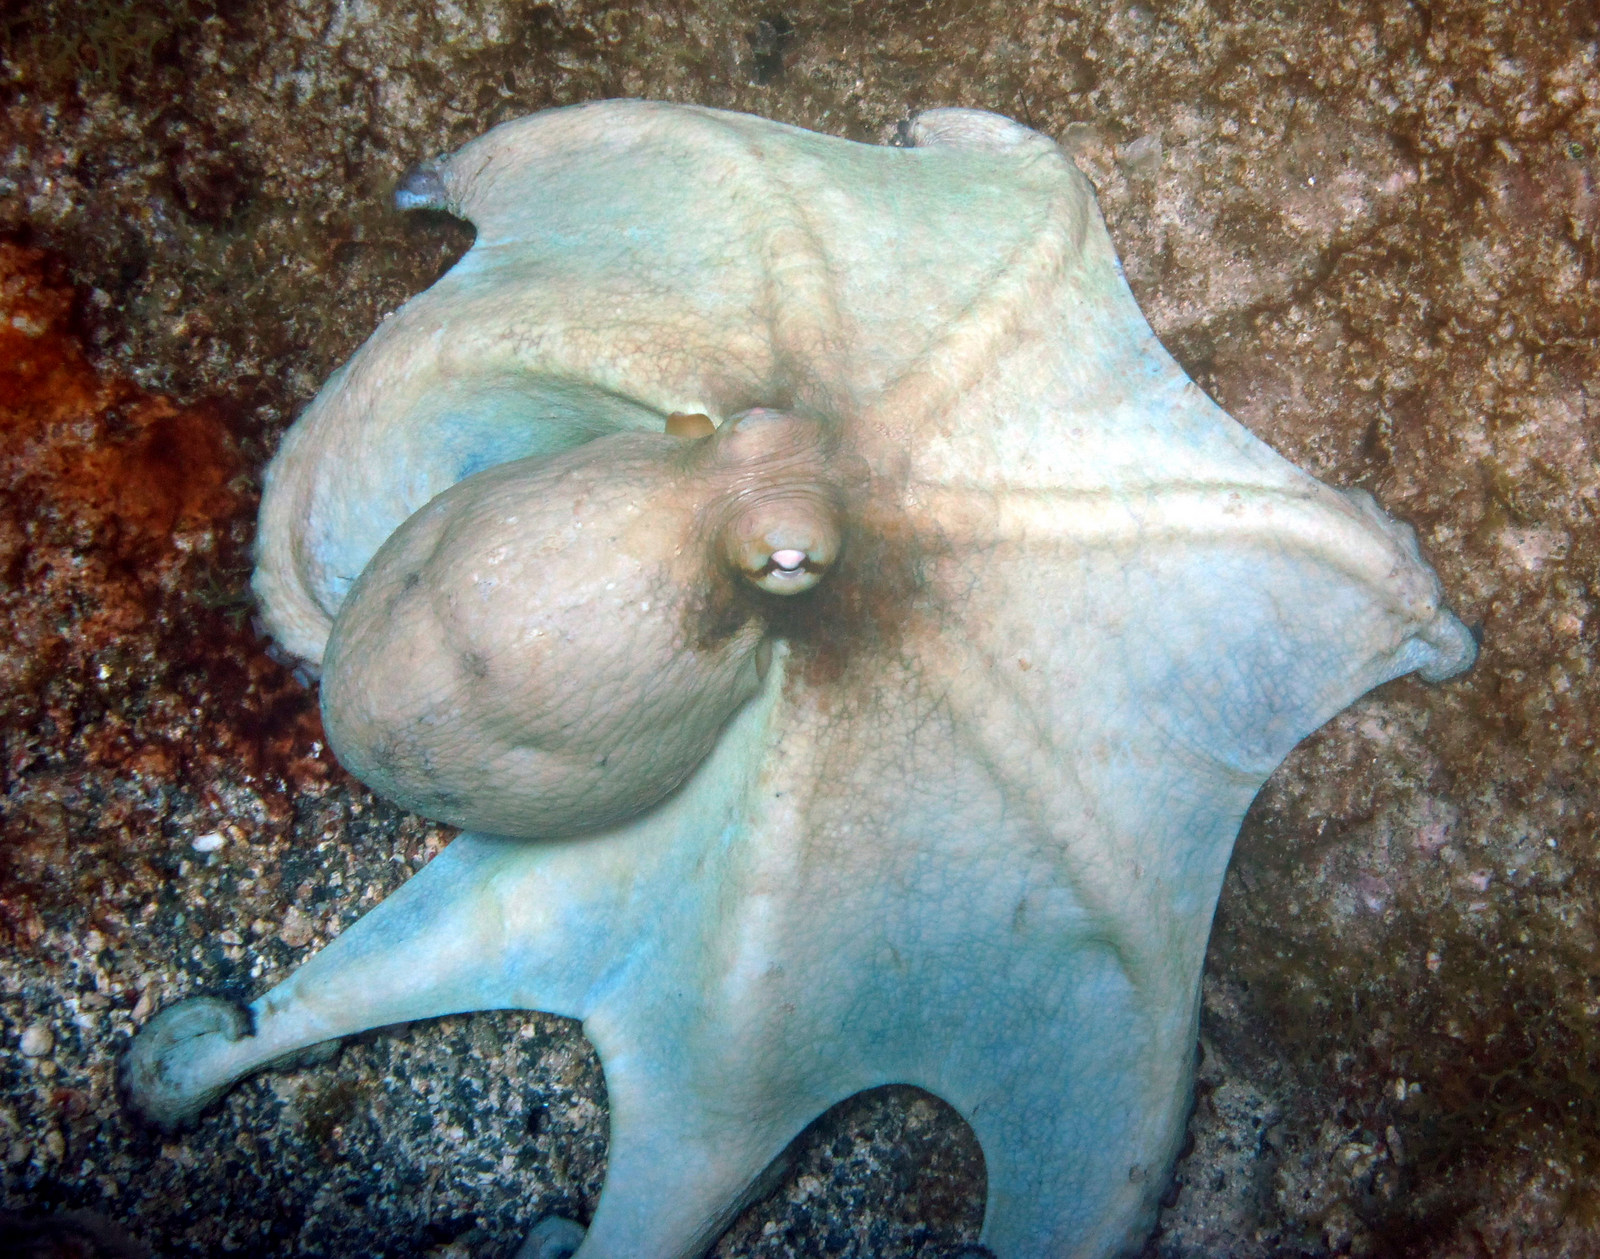 A common octopus on a rock.